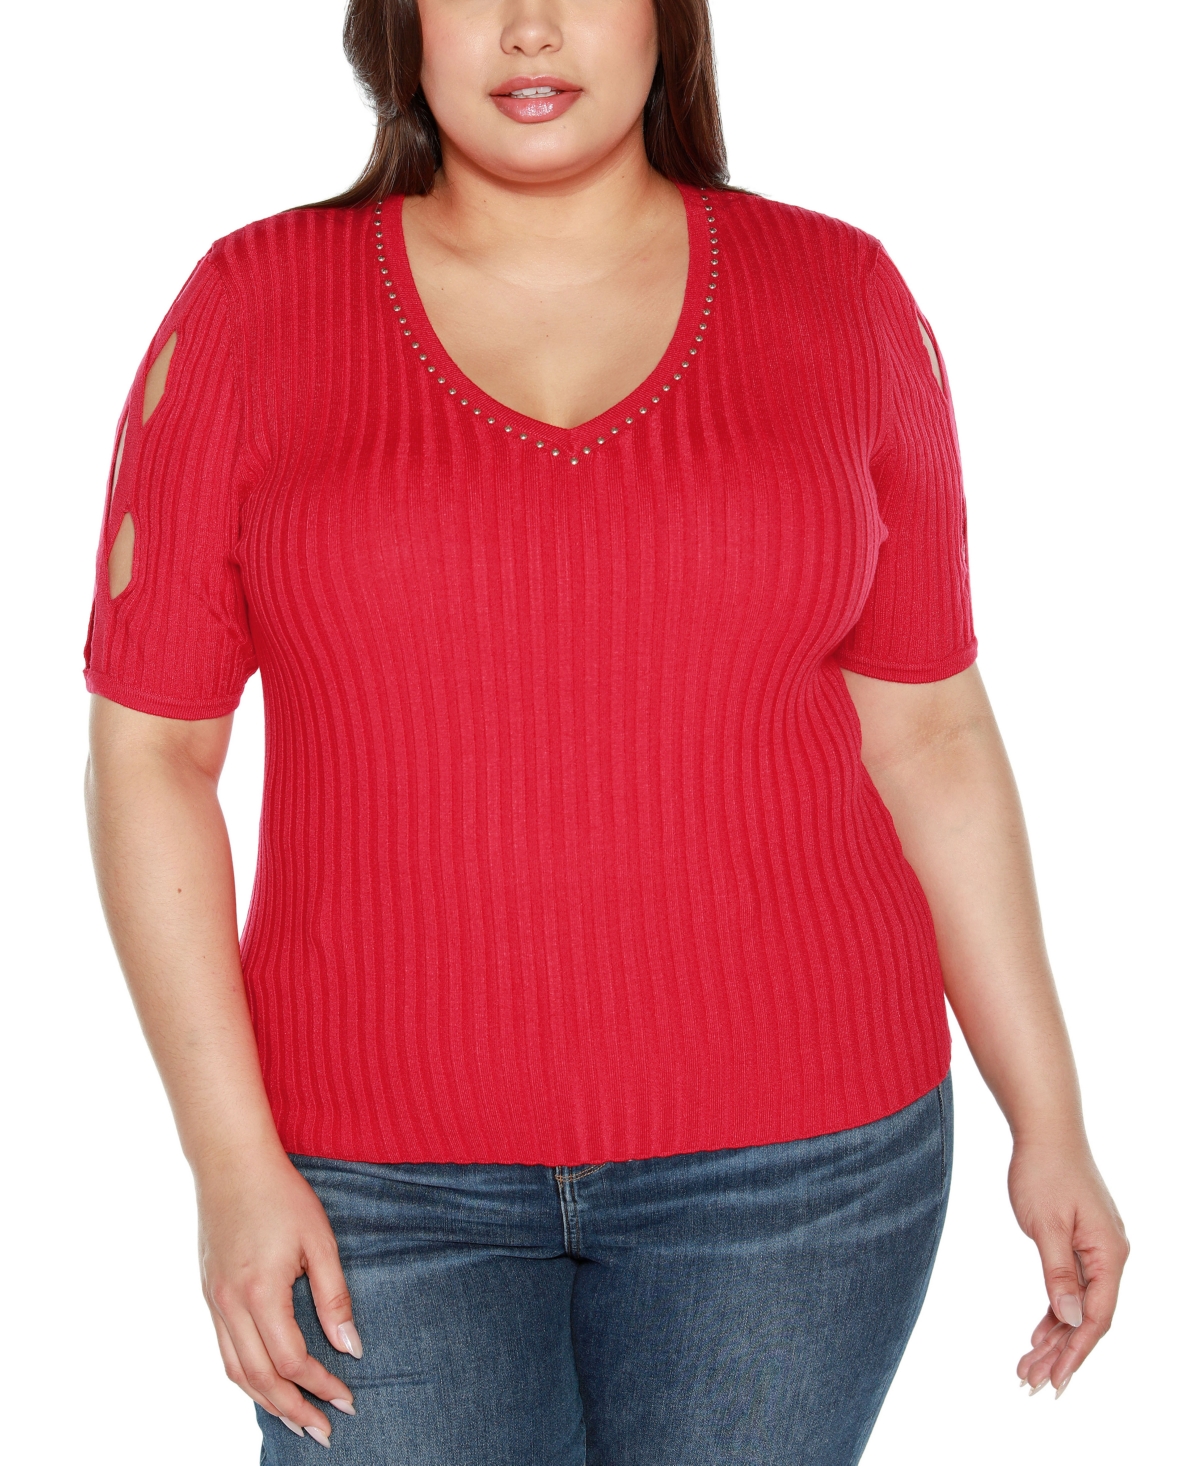 Black Label Plus Size Embellished Criss Cross Sleeve Sweater - Infrared